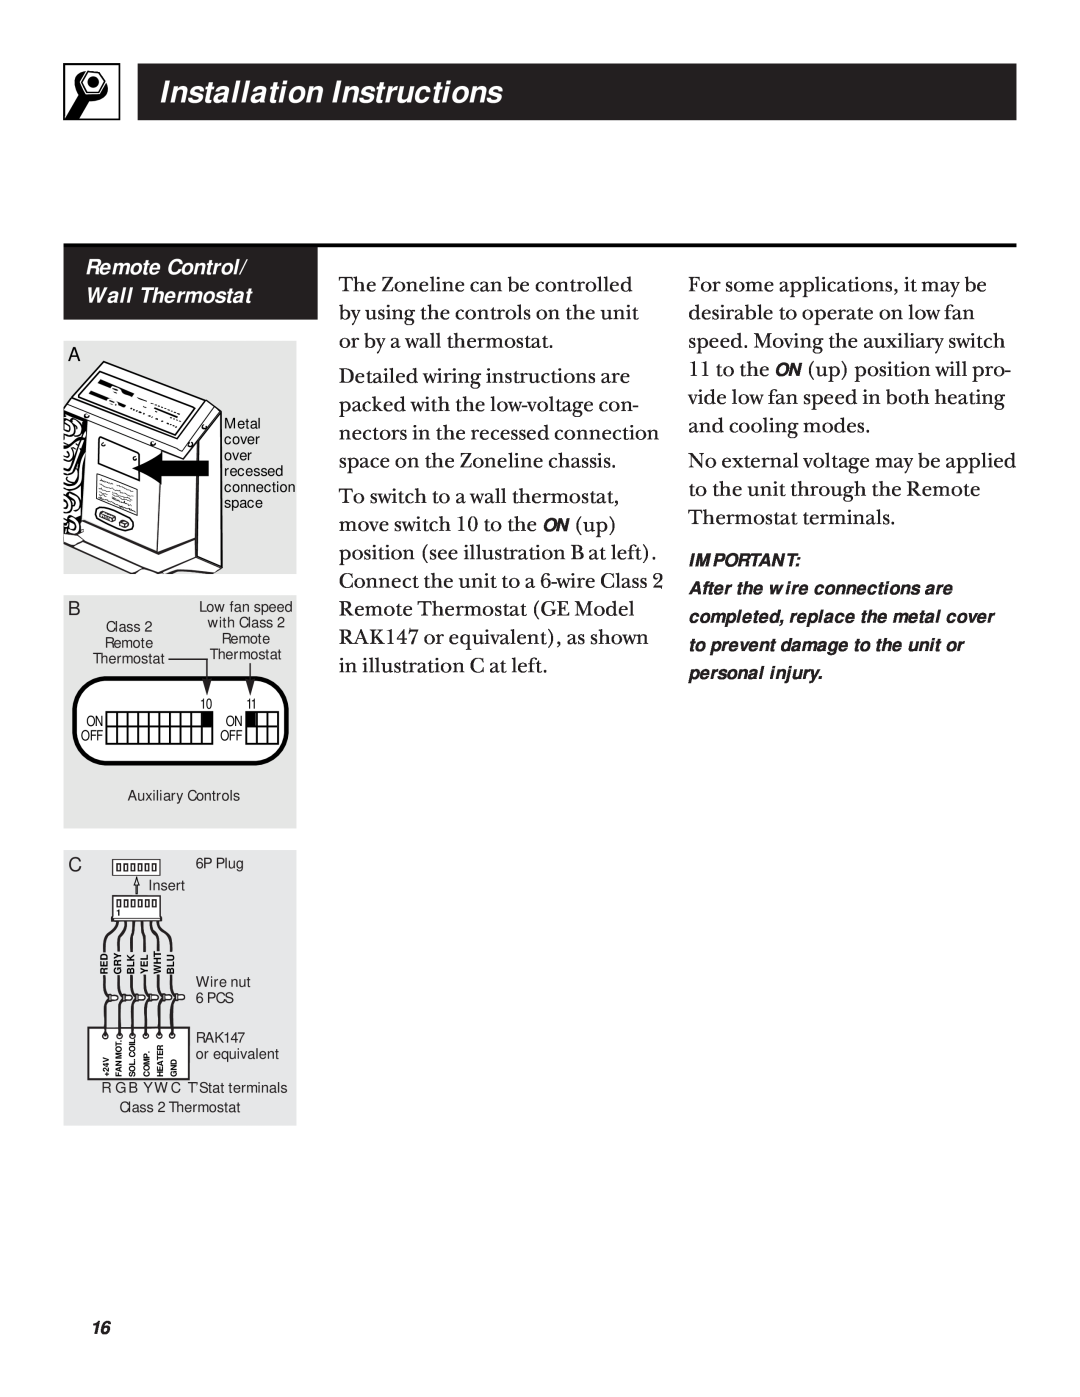 GE 5100 installation instructions Remote Control Wall Thermostat, Installation Instructions 